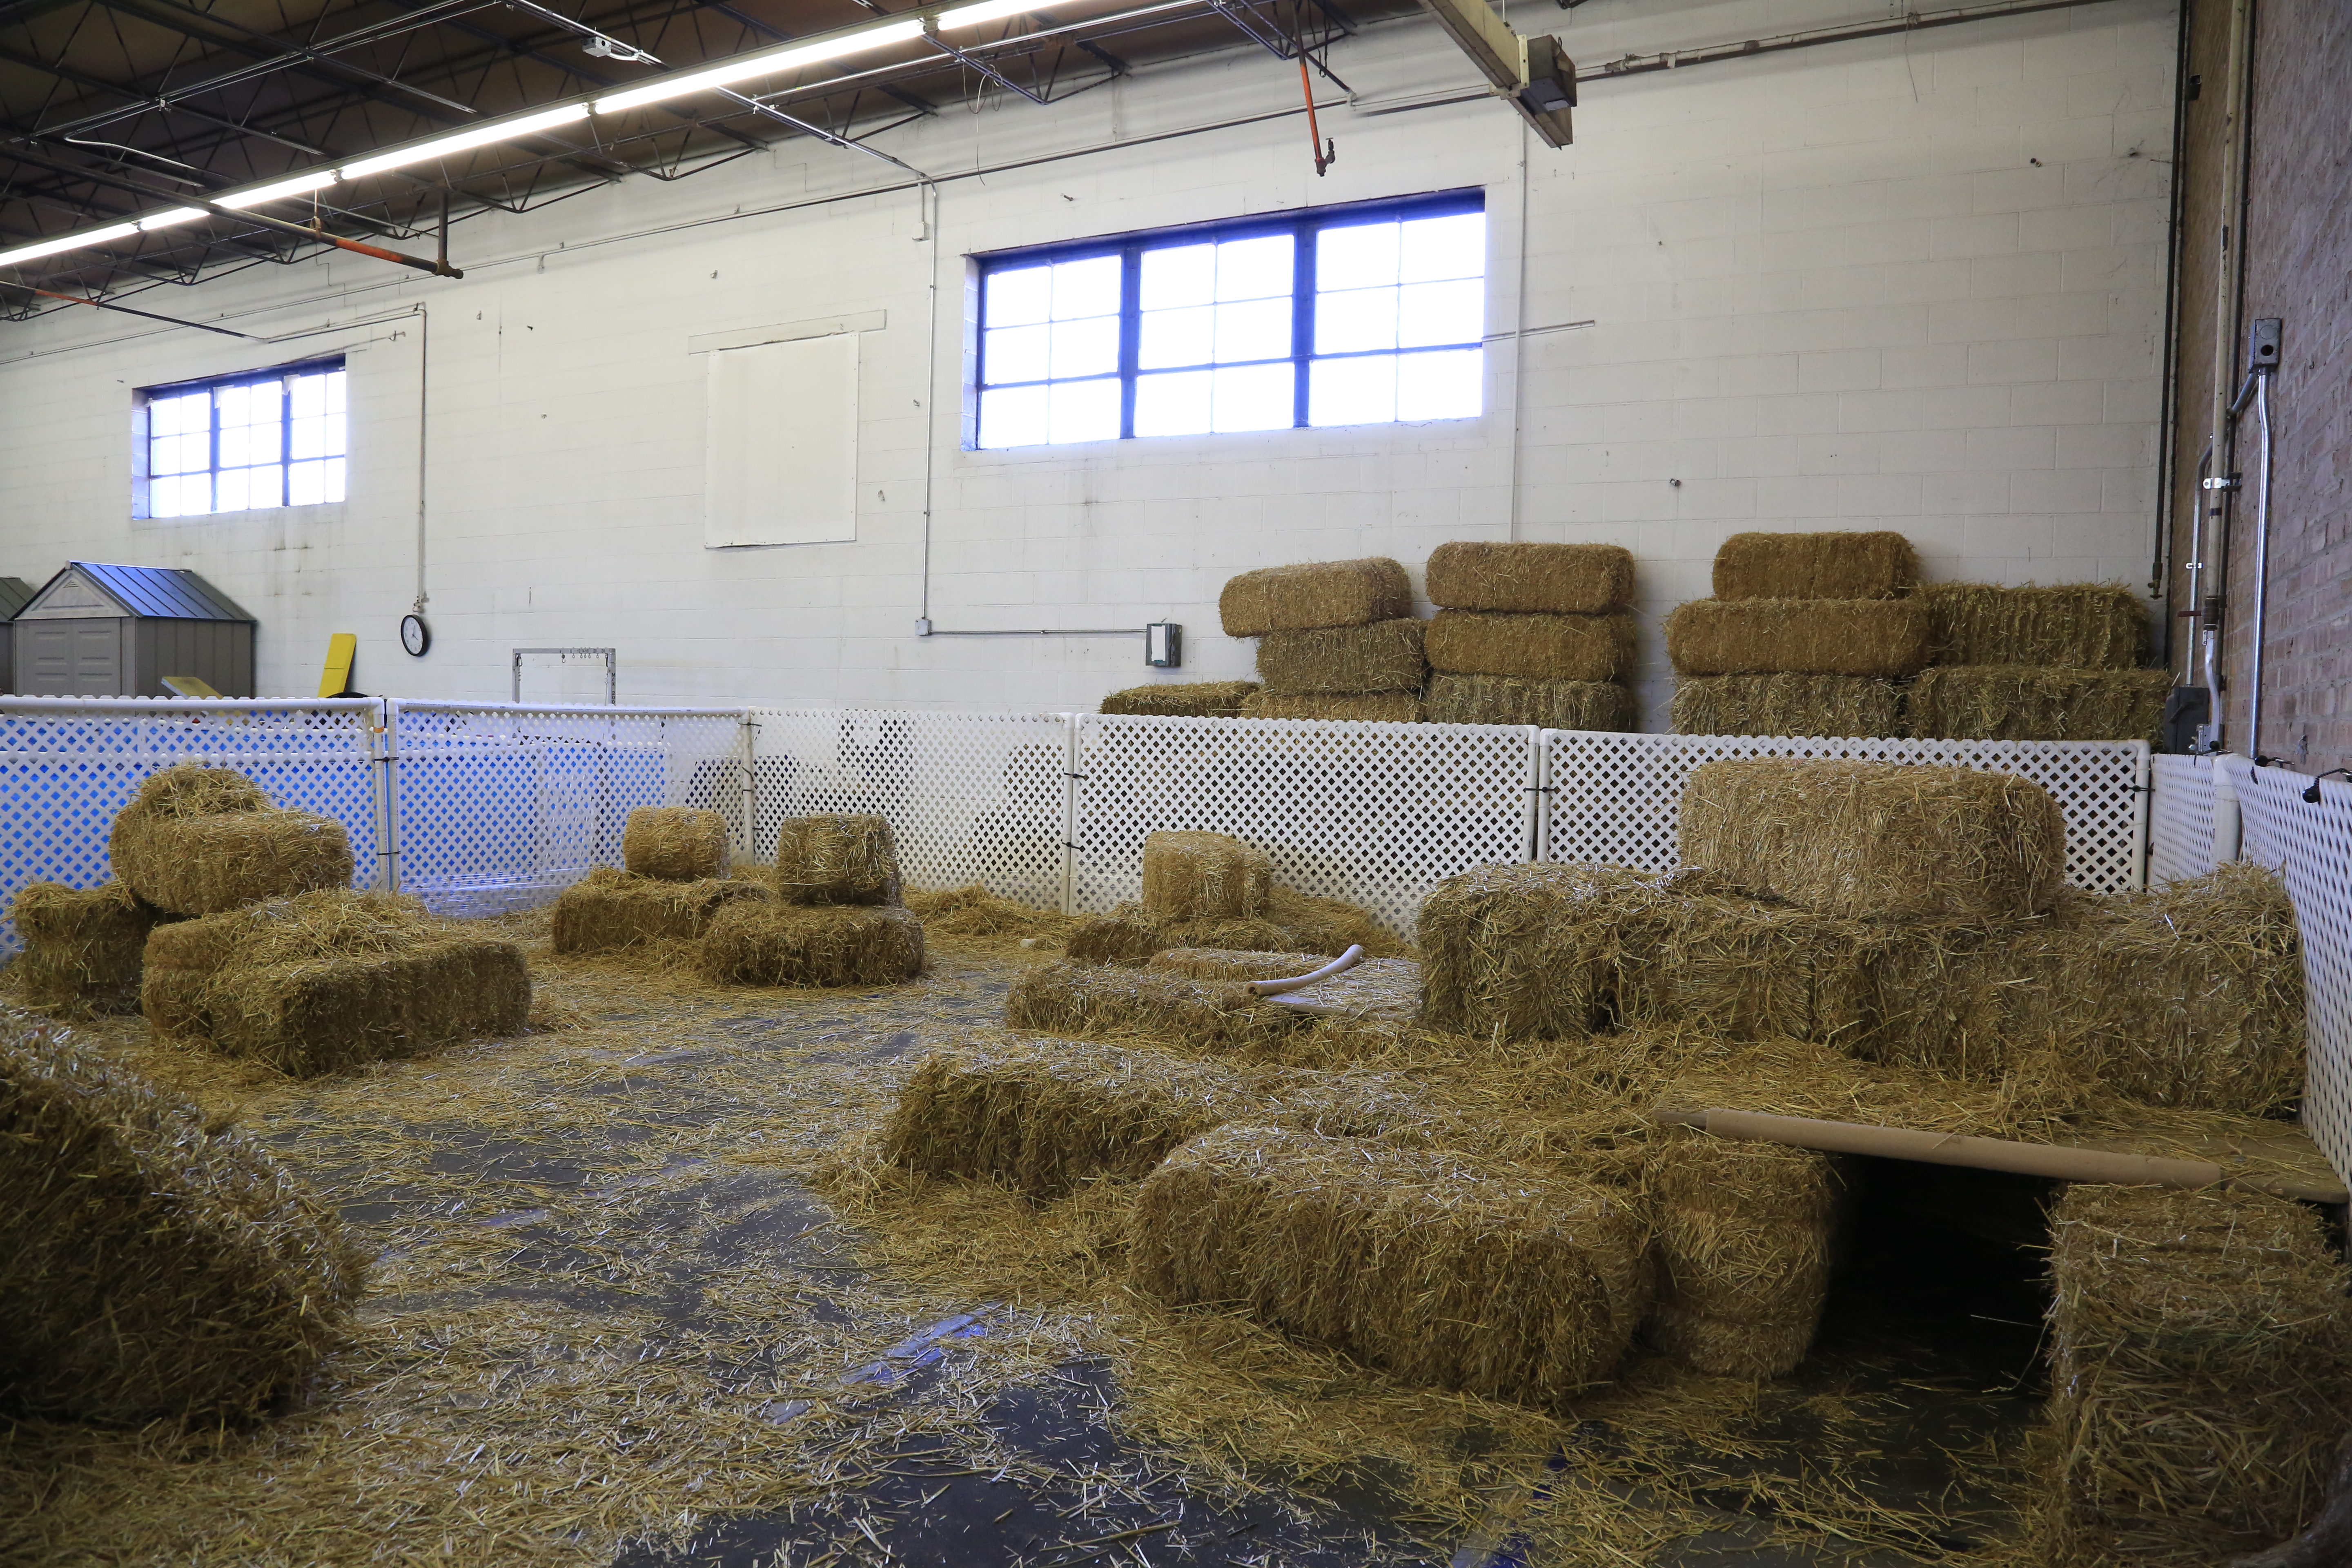 Fenced enclosure containing small square hay bails.